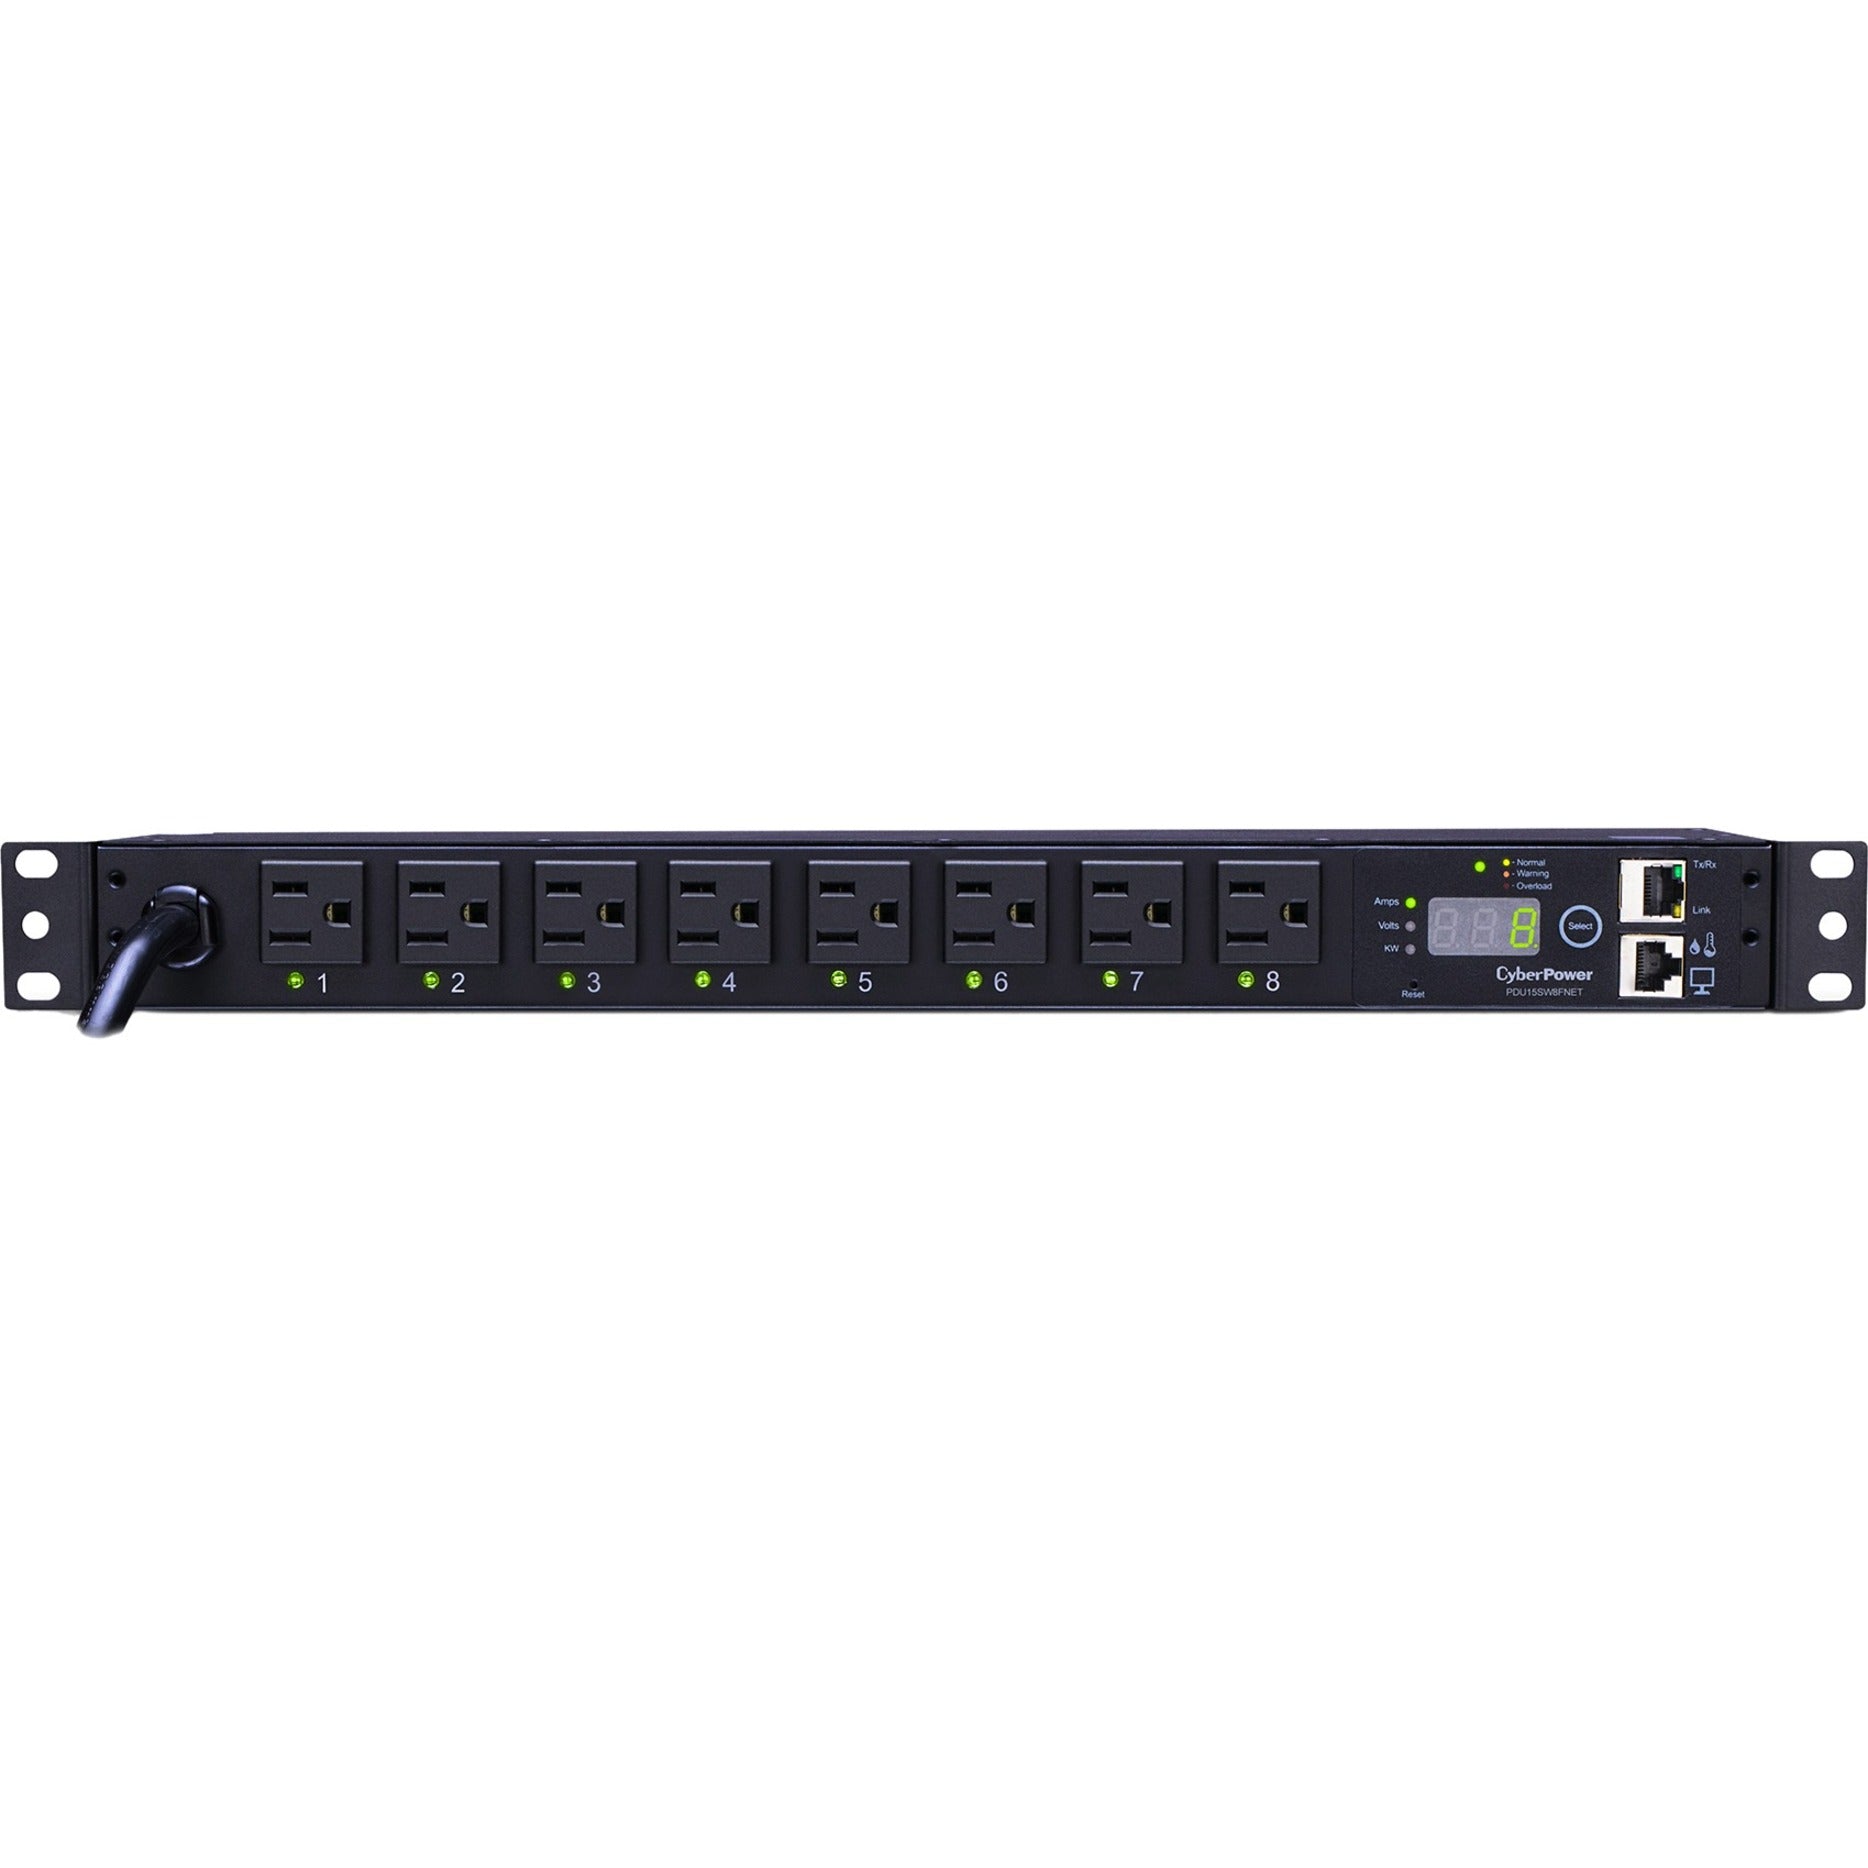 CyberPower PDU15SW8FNET Switched PDU RM 1U 15A 8-Outlet, Rack-mountable, 120V AC